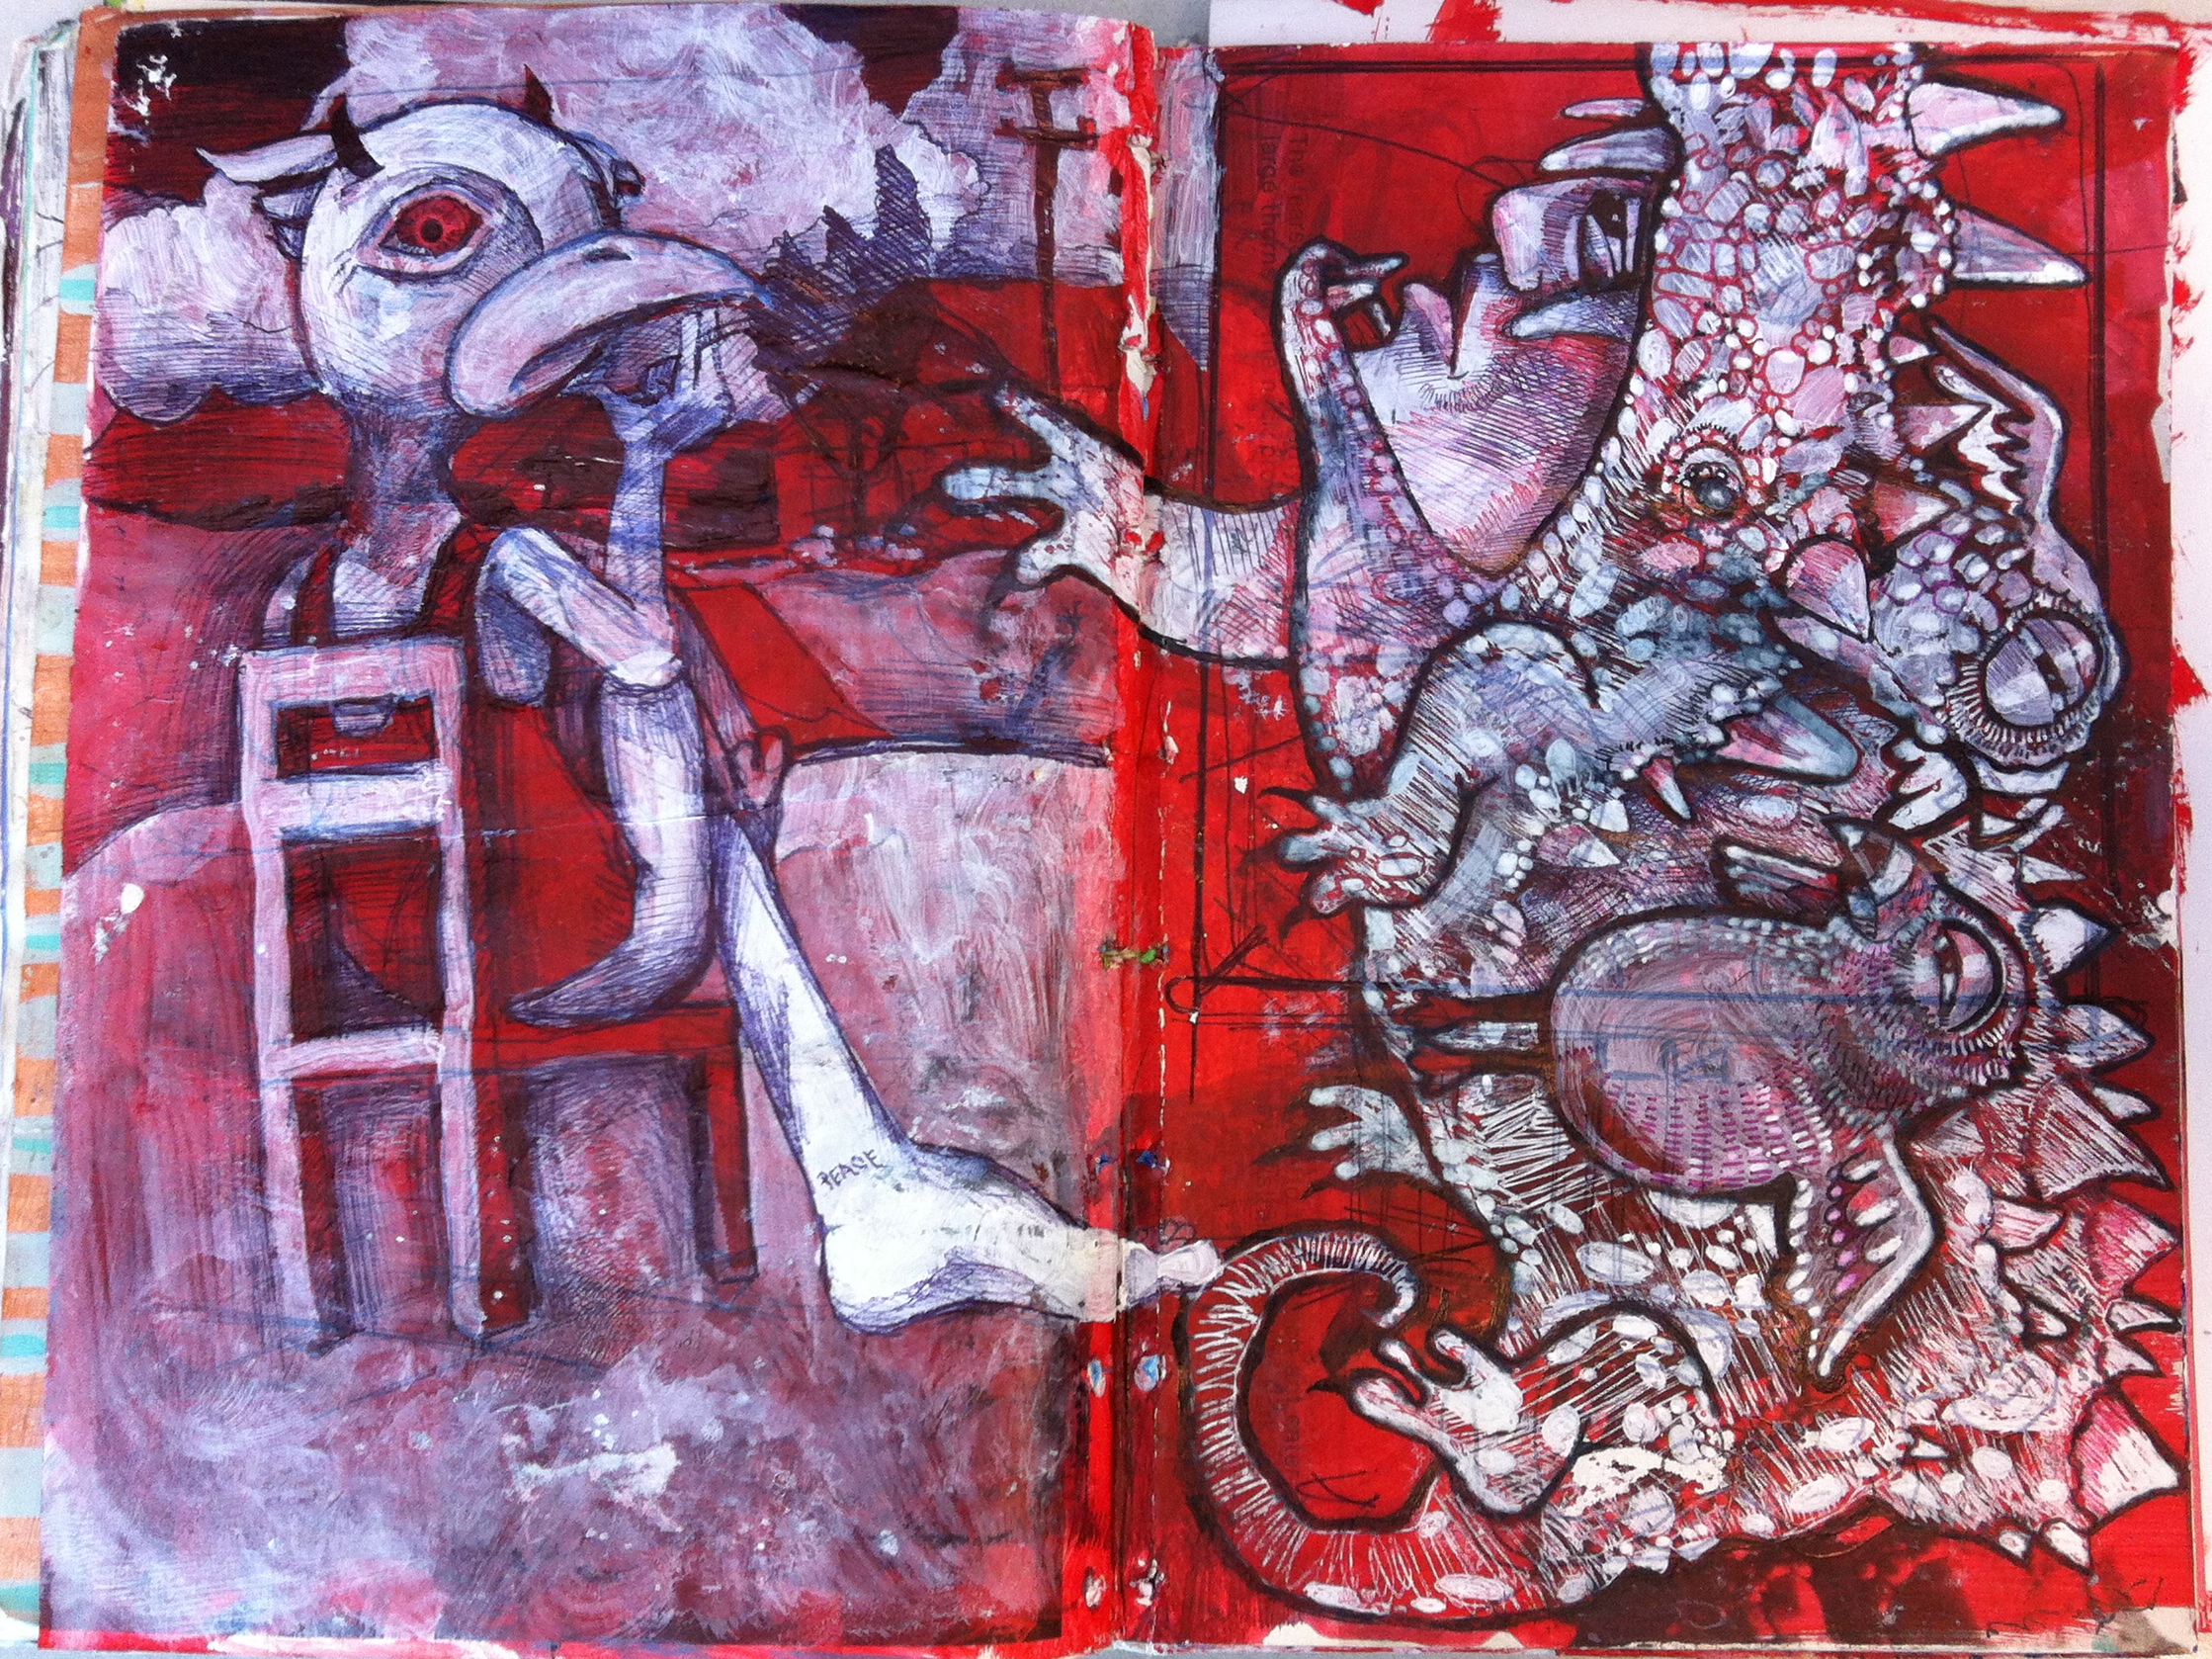 Ink drawing on red background with white 